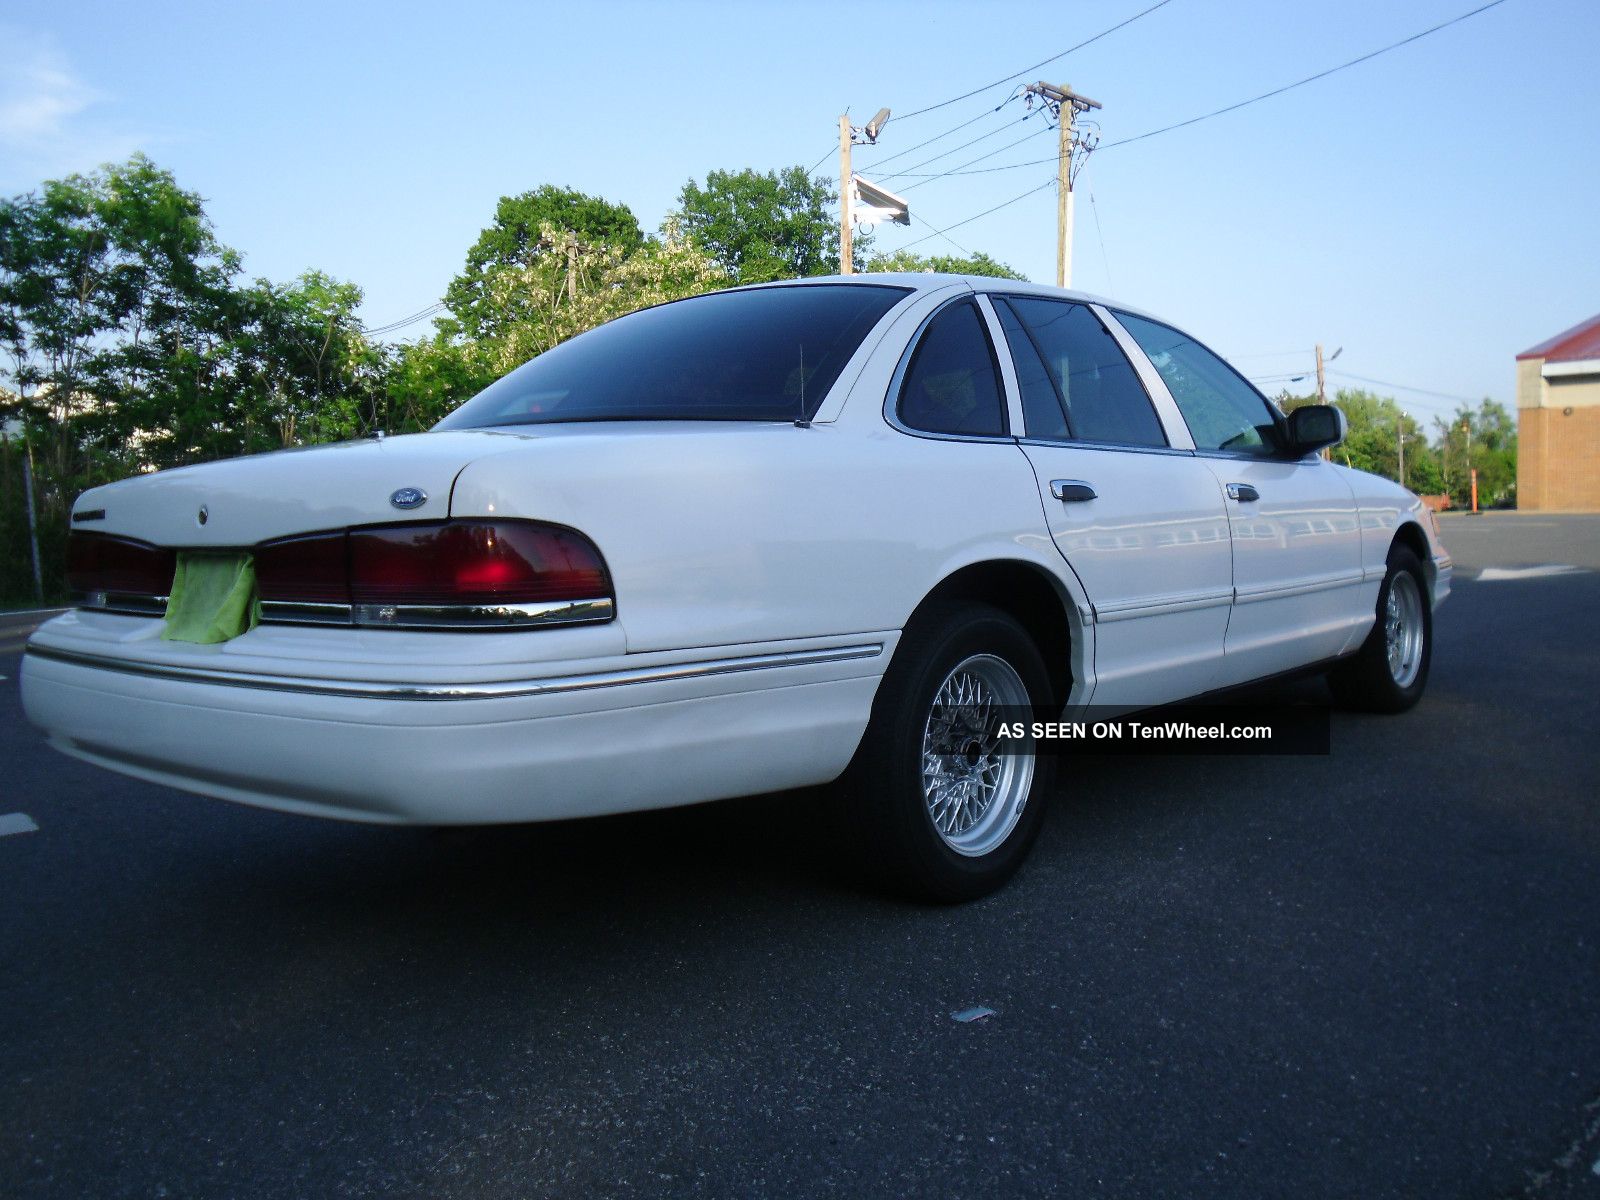 1996 Crown ford picture victoria